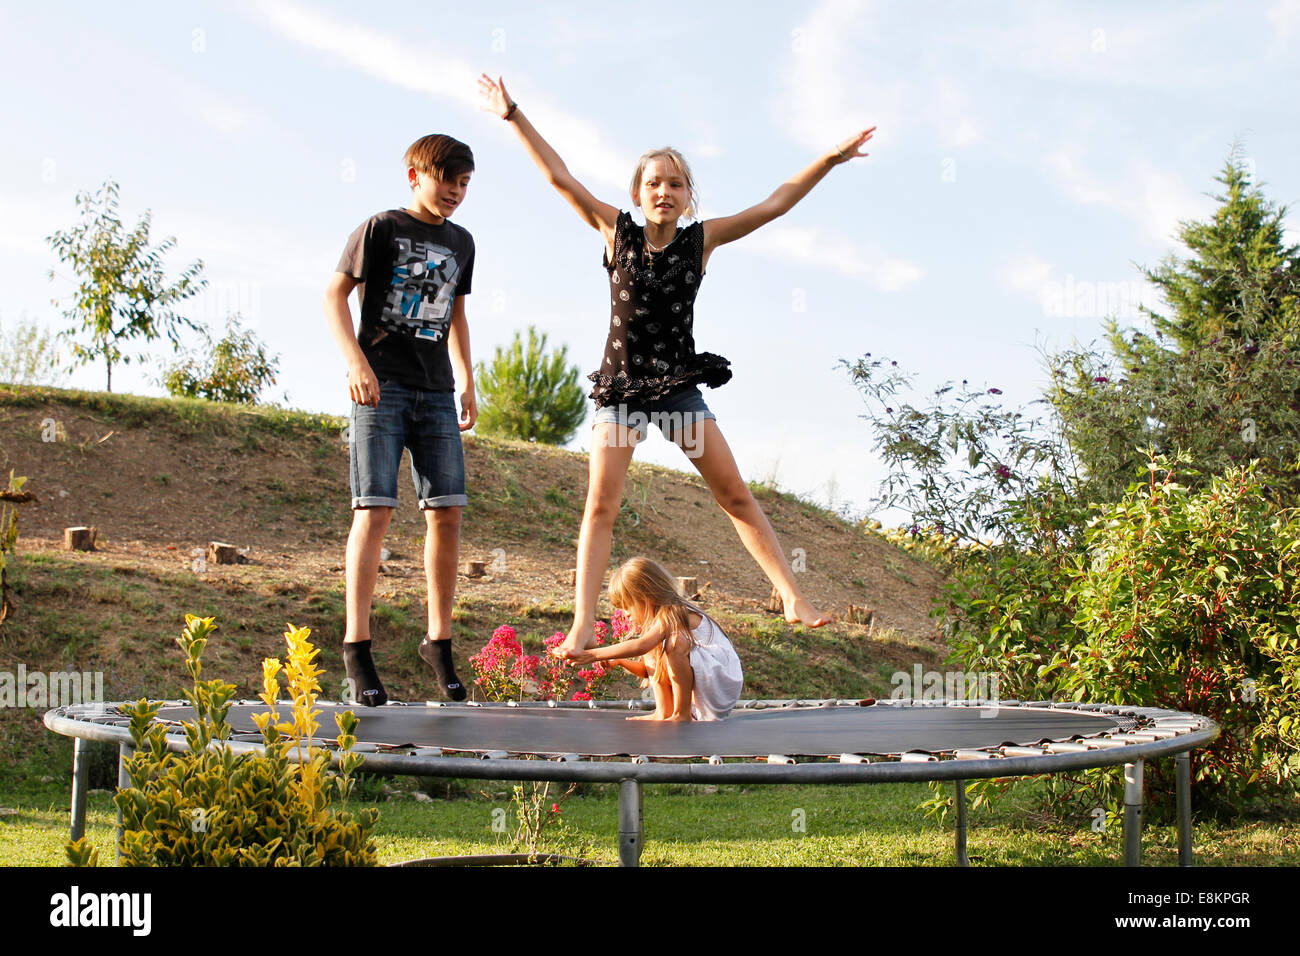 Children playing on a trampoline. Stock Photo